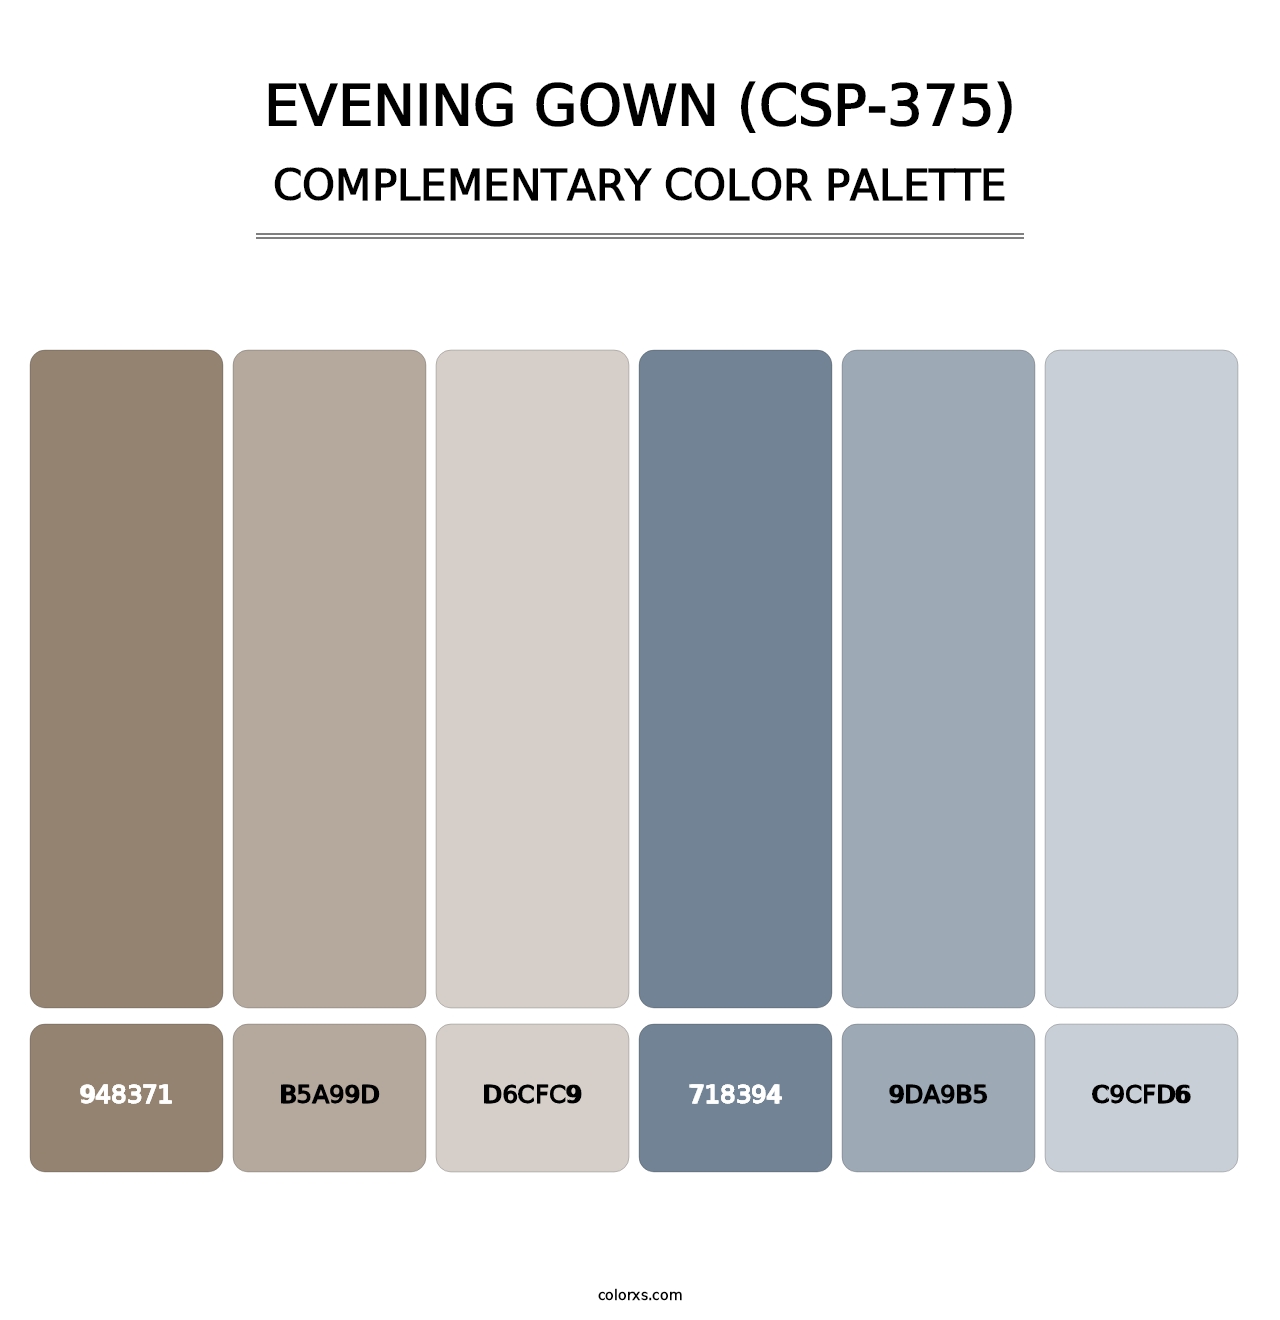 Evening Gown (CSP-375) - Complementary Color Palette